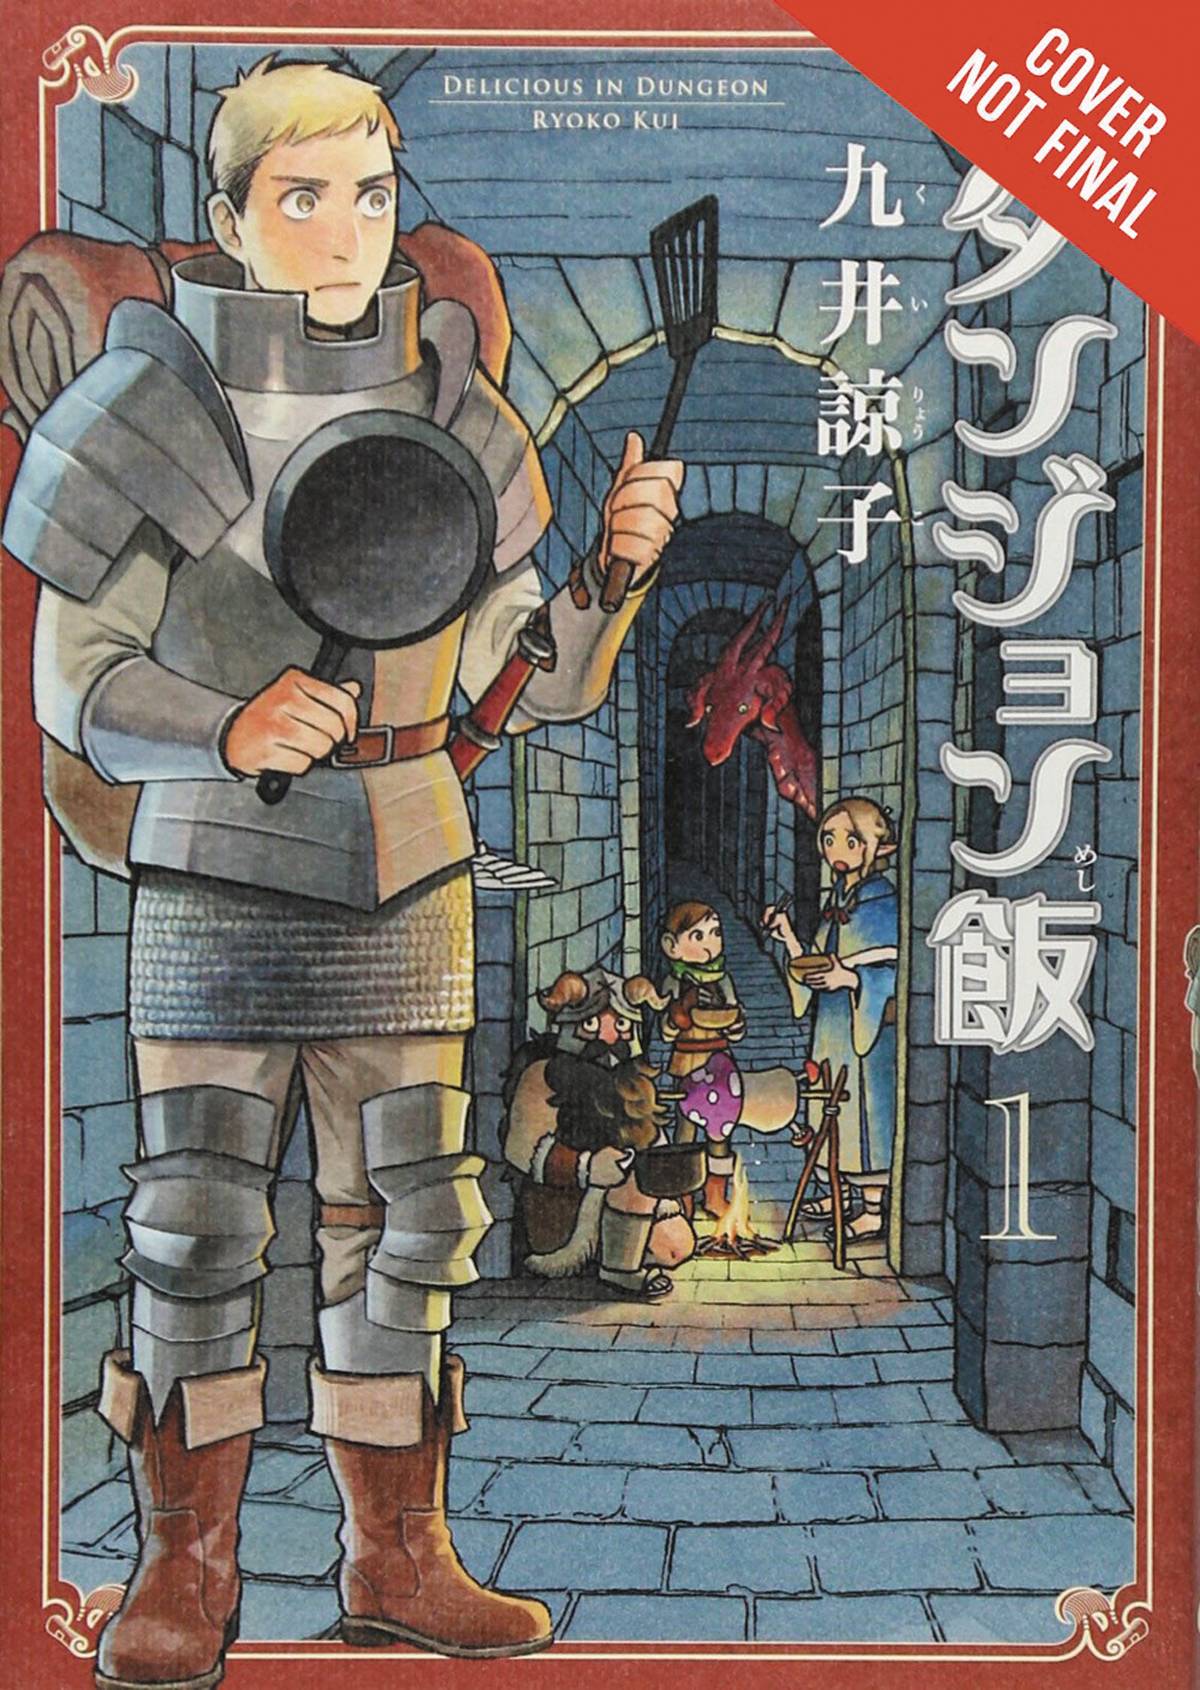 DELICIOUS IN DUNGEON GN VOL 01 (C: 0-1-0)